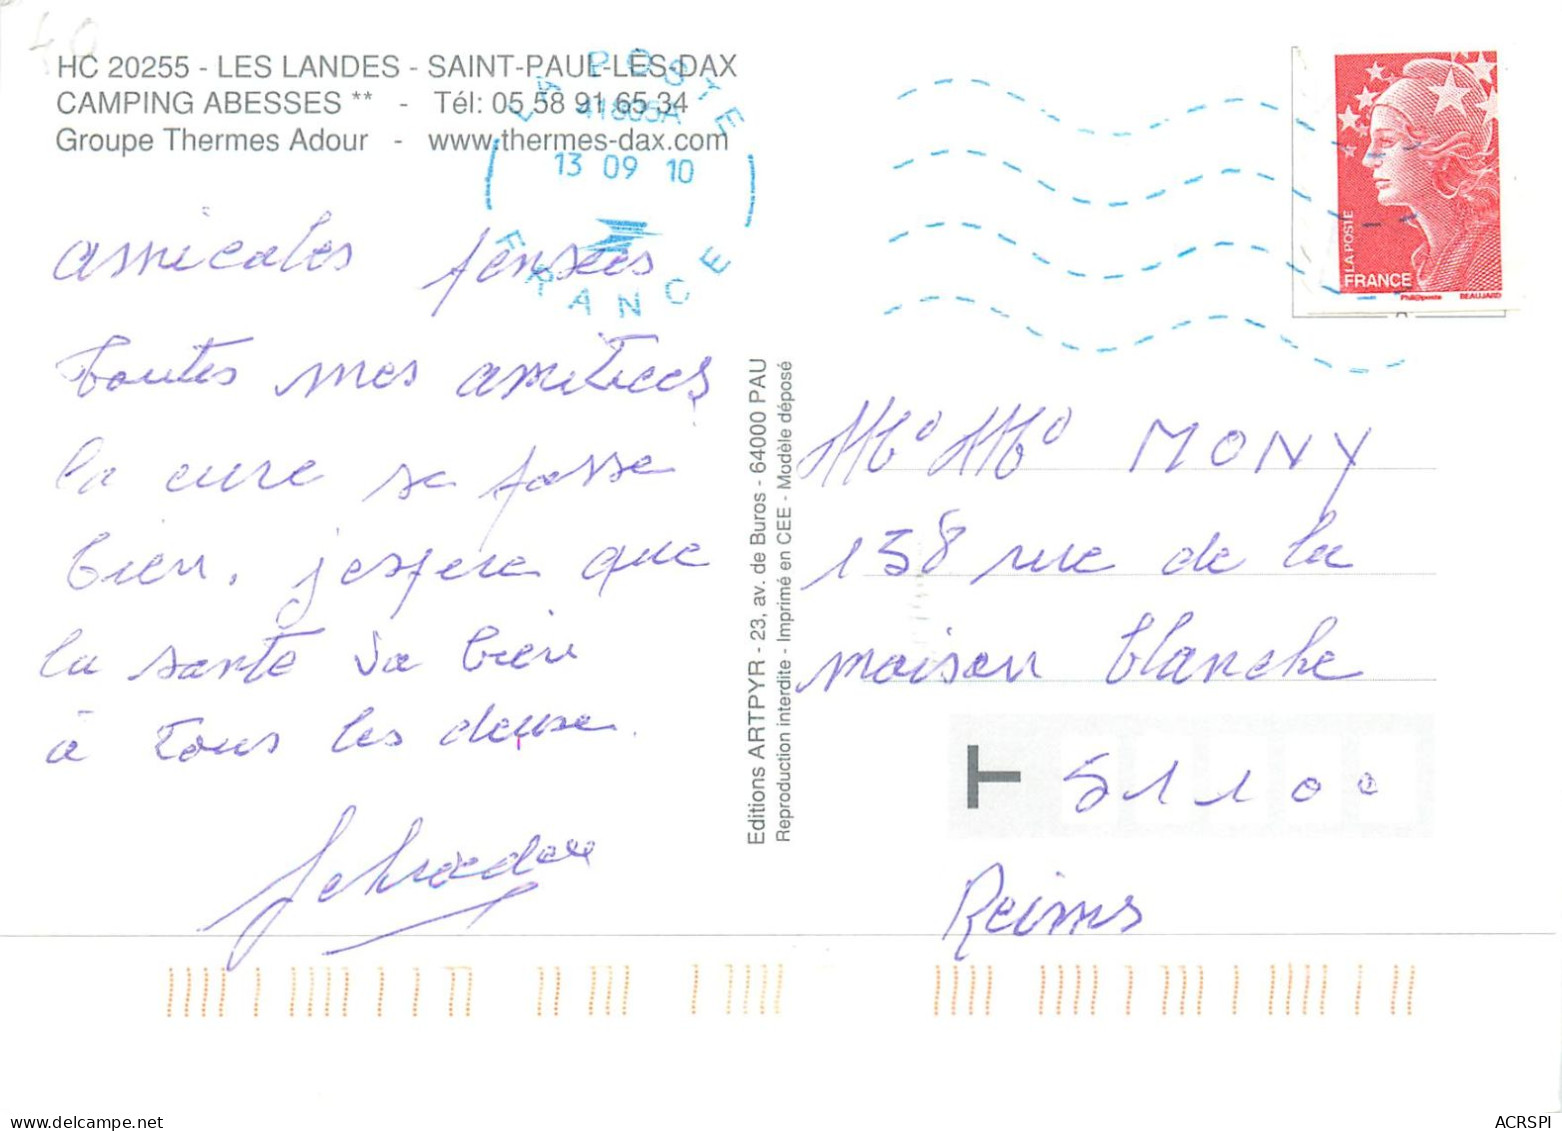 Saint Paul Les DAX  Camping ABESSES Groupe Thermes ADOUR  46   (scan Recto-verso)MA2282 - Dax